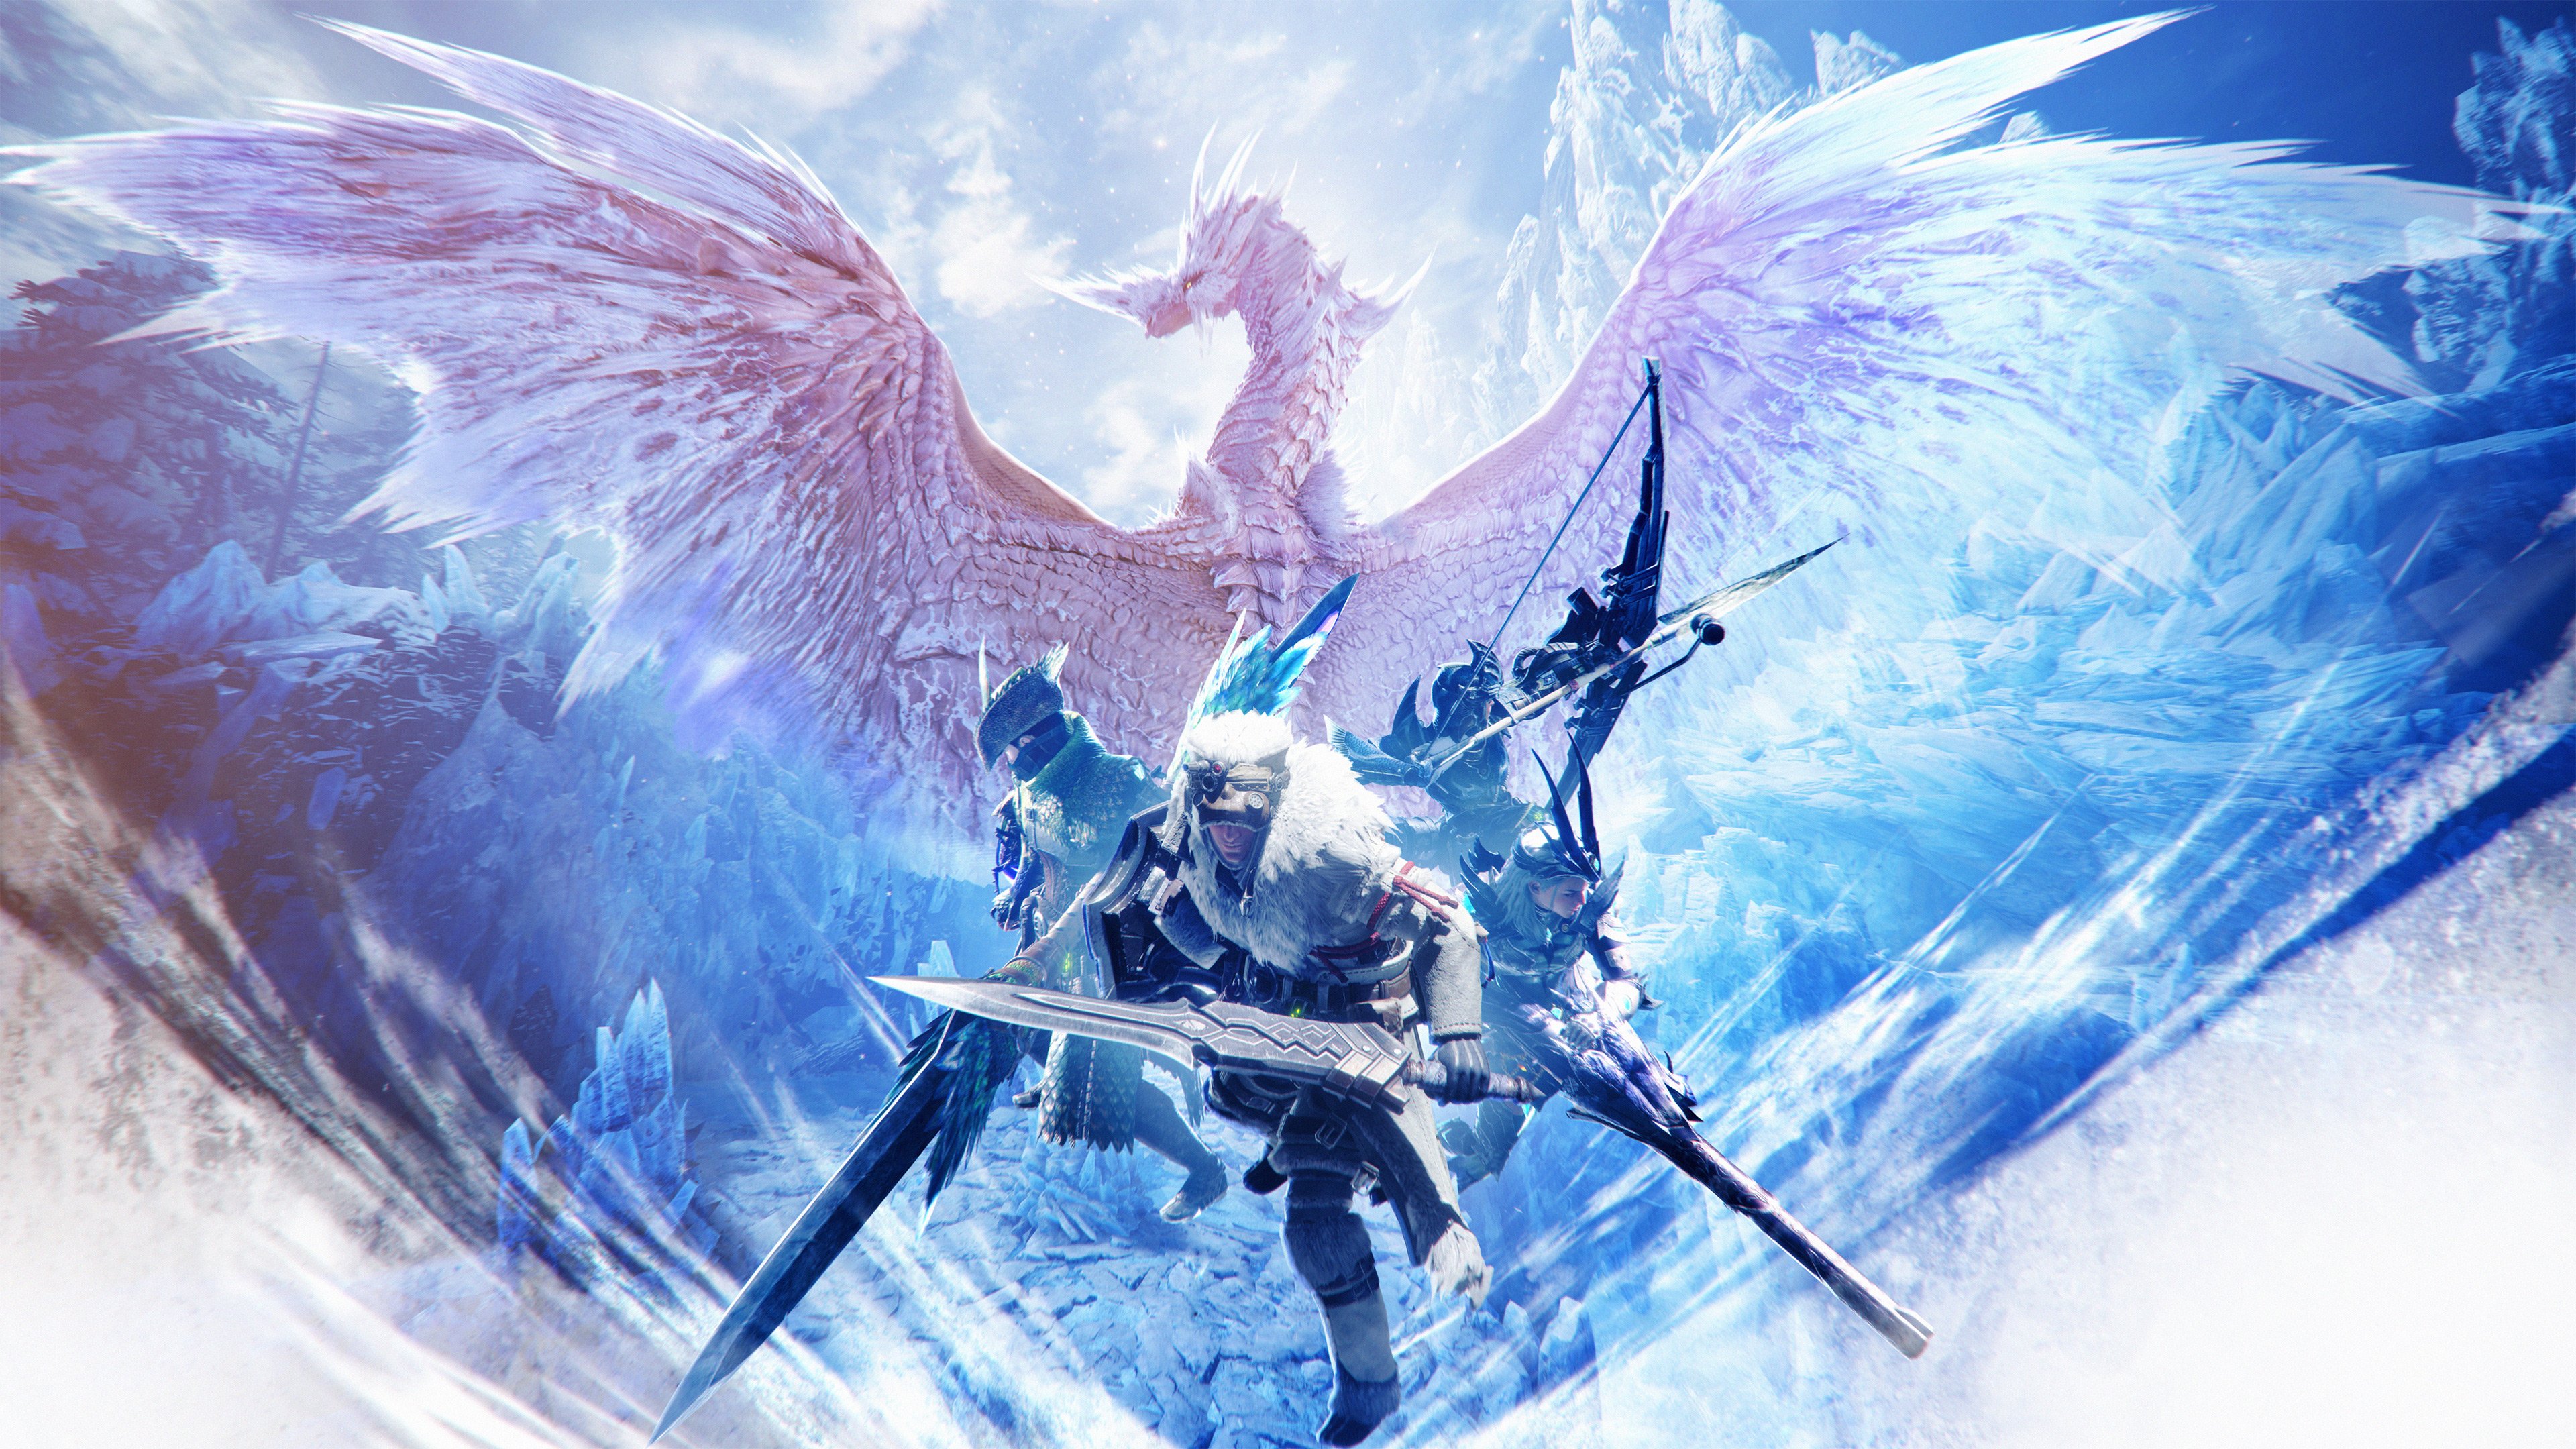 Monster Hunter World Iceborne Now Available On Ps4 And Xbox One • The Mako Reactor